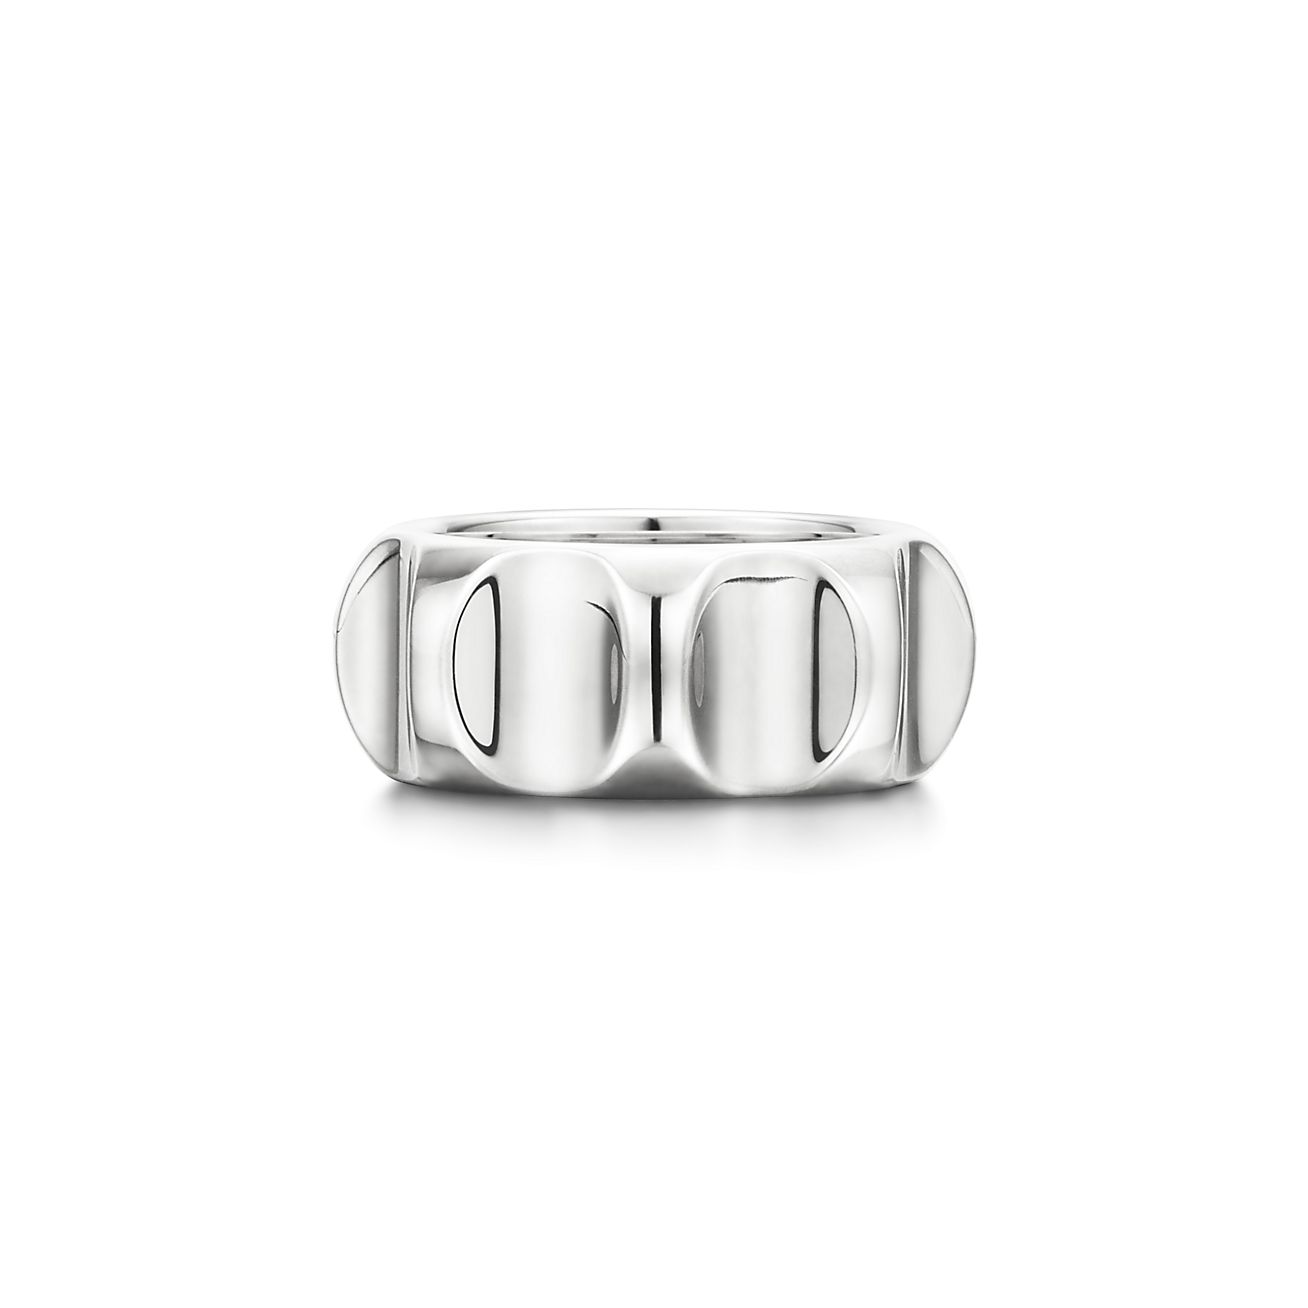 Paloma's Groove wide ring in sterling silver, 9 mm wide. | Tiffany 